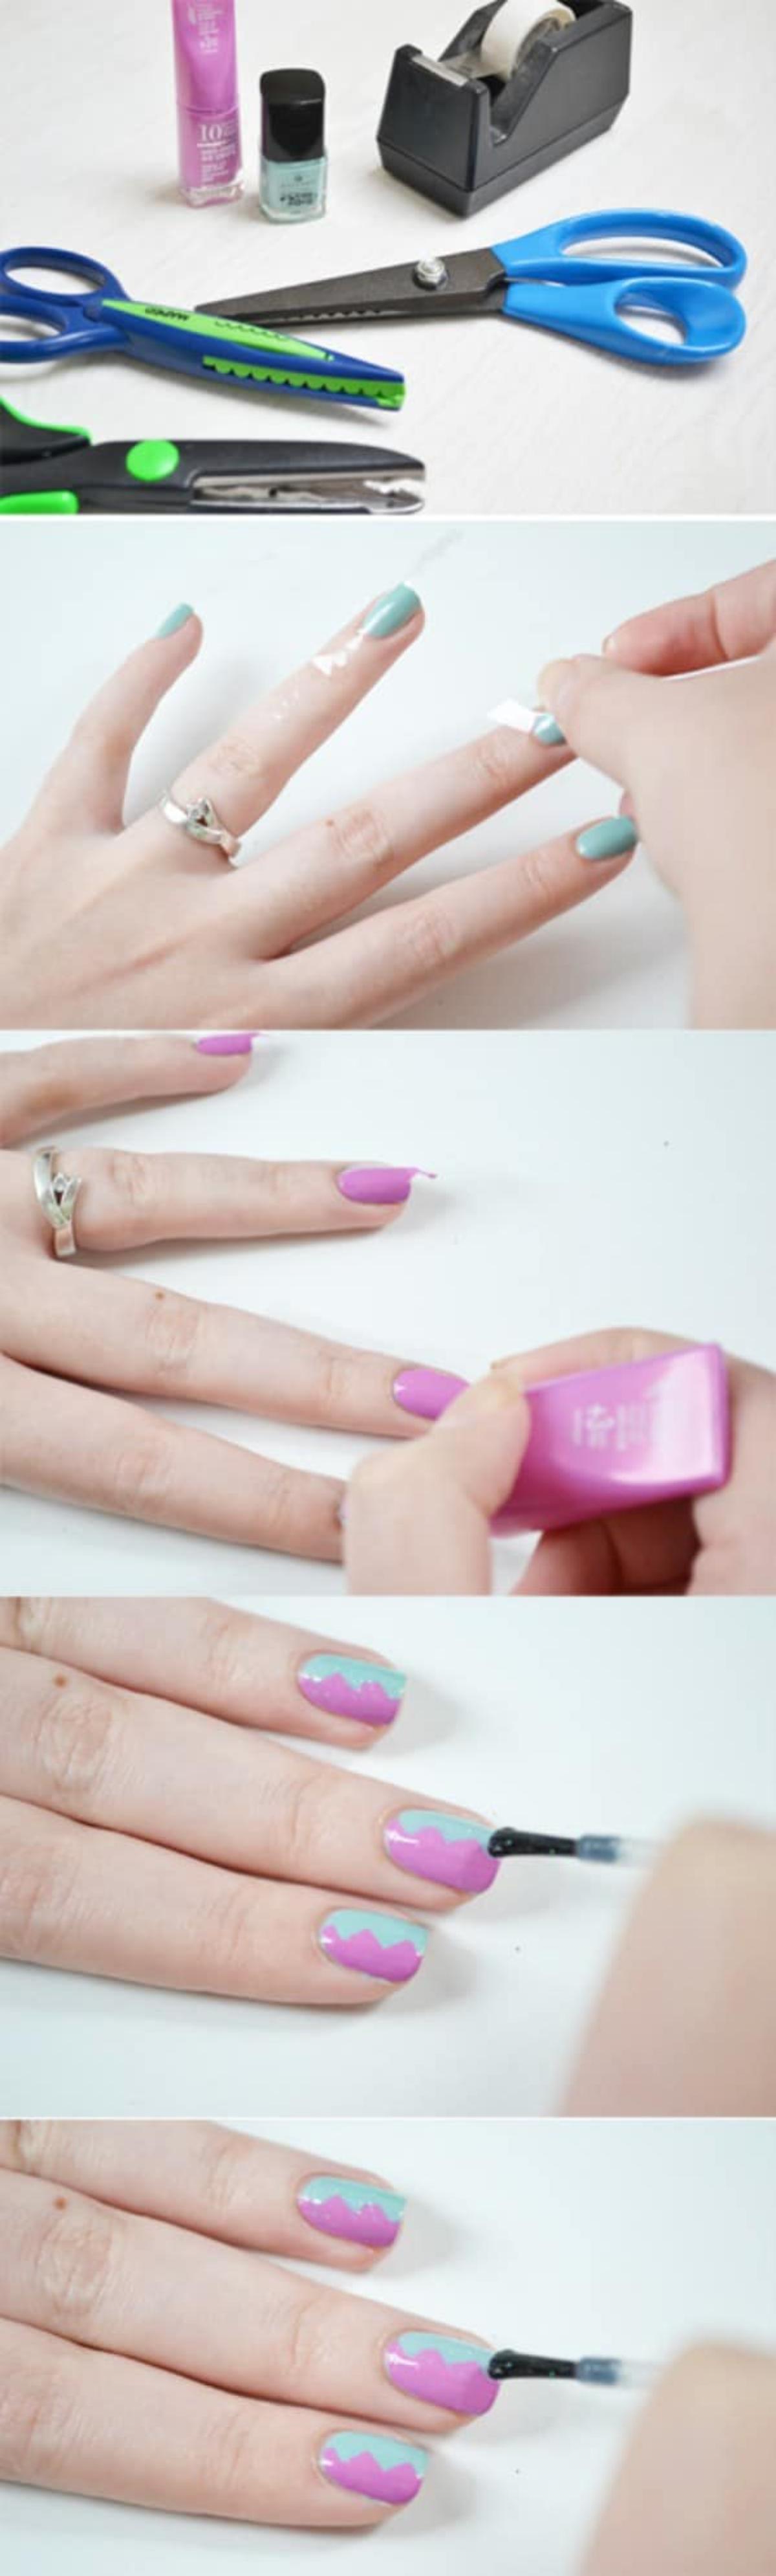 How to make Easy Two-Toned Nails collage.